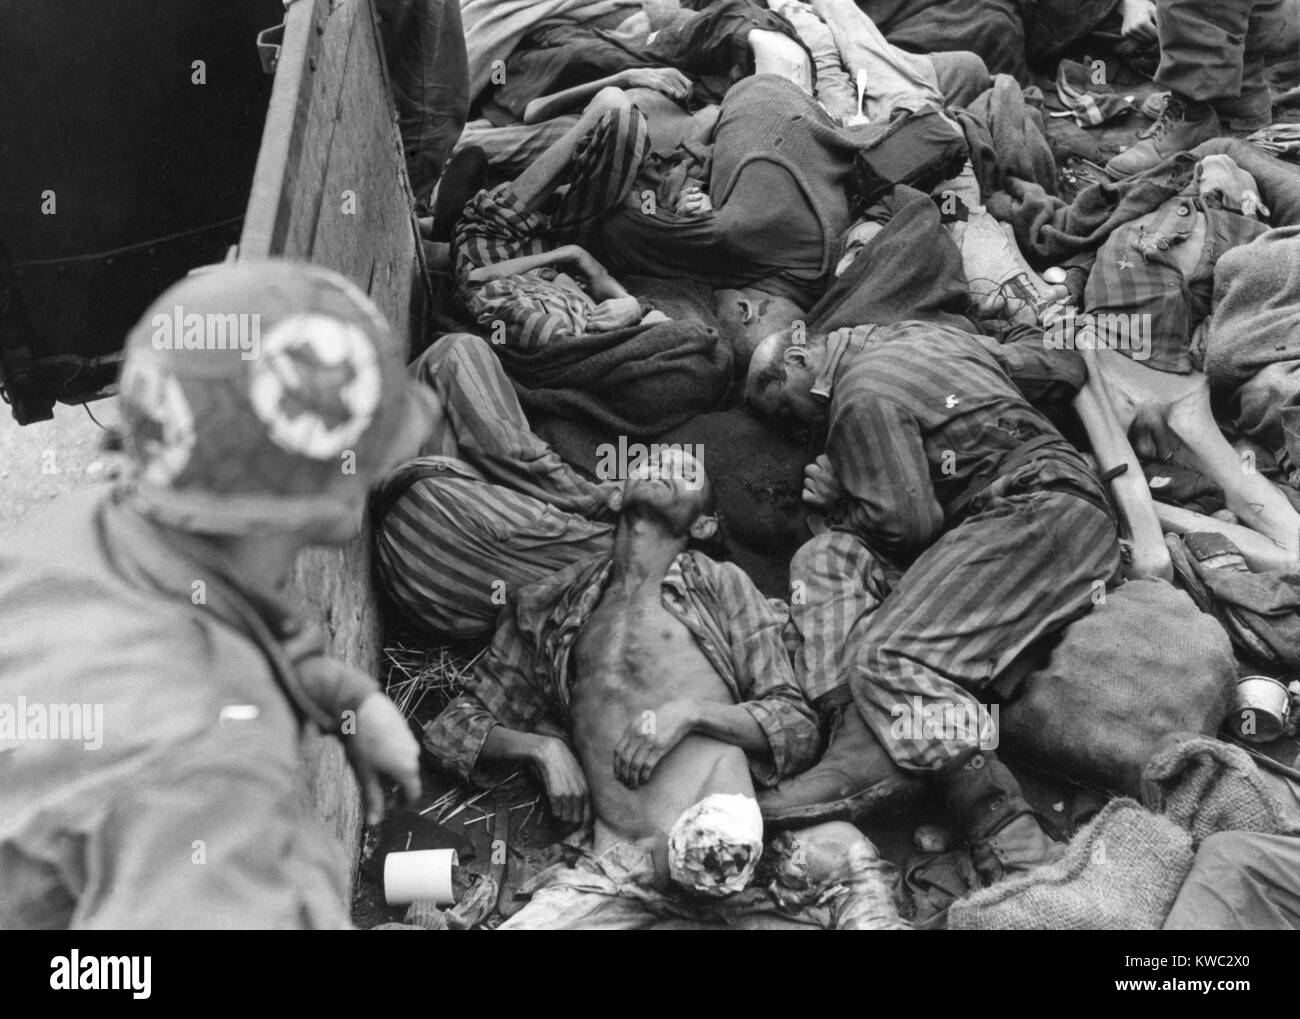 Seventh US Army Medical Corpsman looks into train car filled with slain or starved prisoners. As Nazi-Germany collapsed in March 1945, SS Guards shipped these bodies to Dachau for cremation. Many Nazi SS Guards deserted the camp as US army approached in April 1945. World War 2 (BSLOC 2015 13 13) Stock Photo